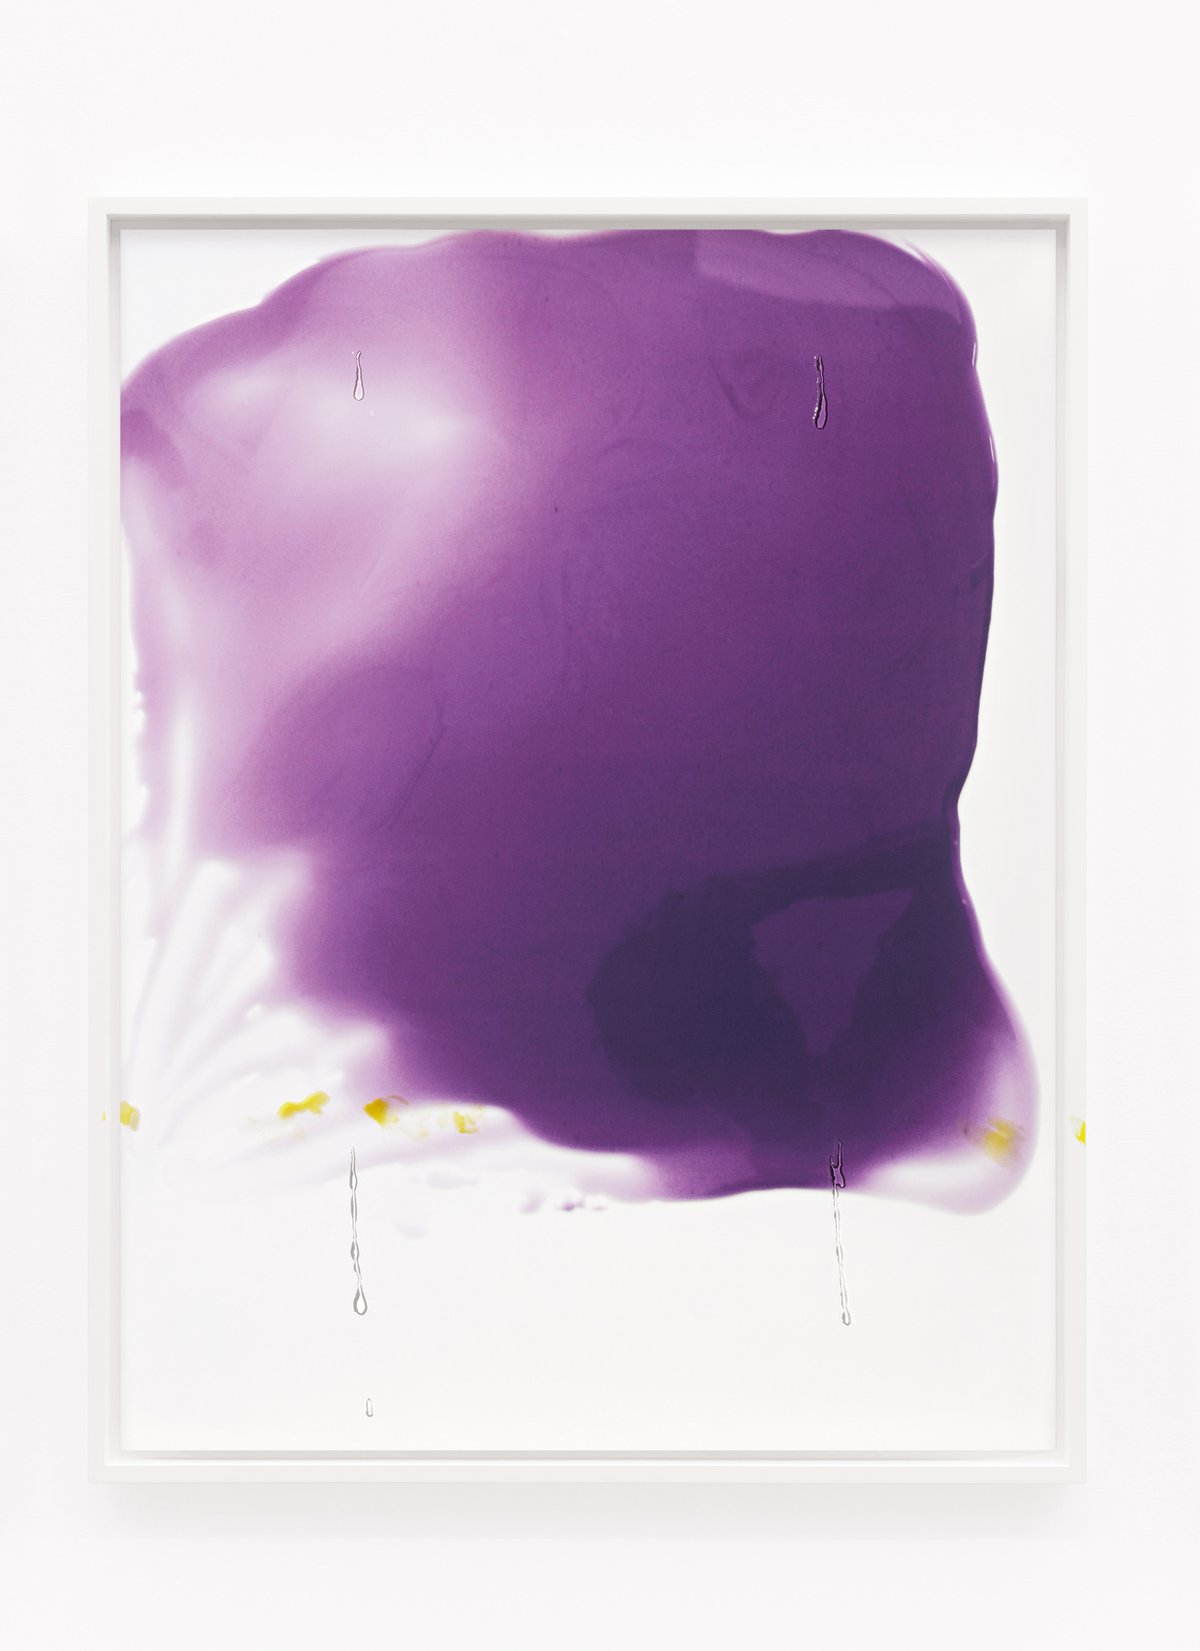 Lisa HolzerThe Party Sequel (Paris), 2017Pigment print on cotton paper, crystal clear 202/1 polyurethane and acrylic paint on glass110.3 x 86.3 cm